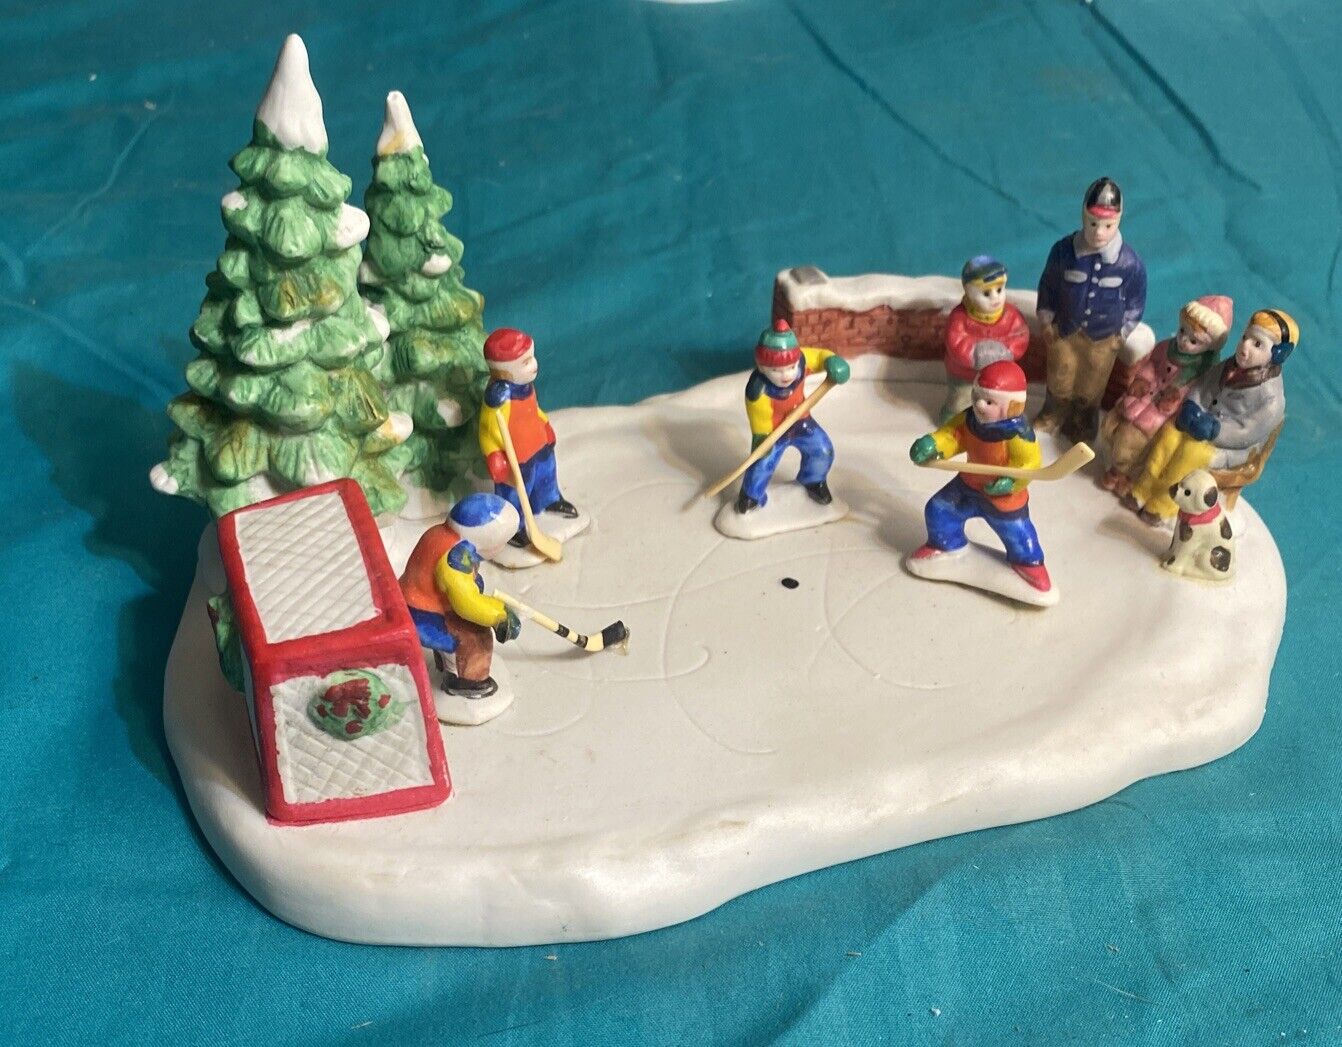 Vintage 1994 Lemax Dickensvale Collectibles Porcelain Hockey Game Item #43126